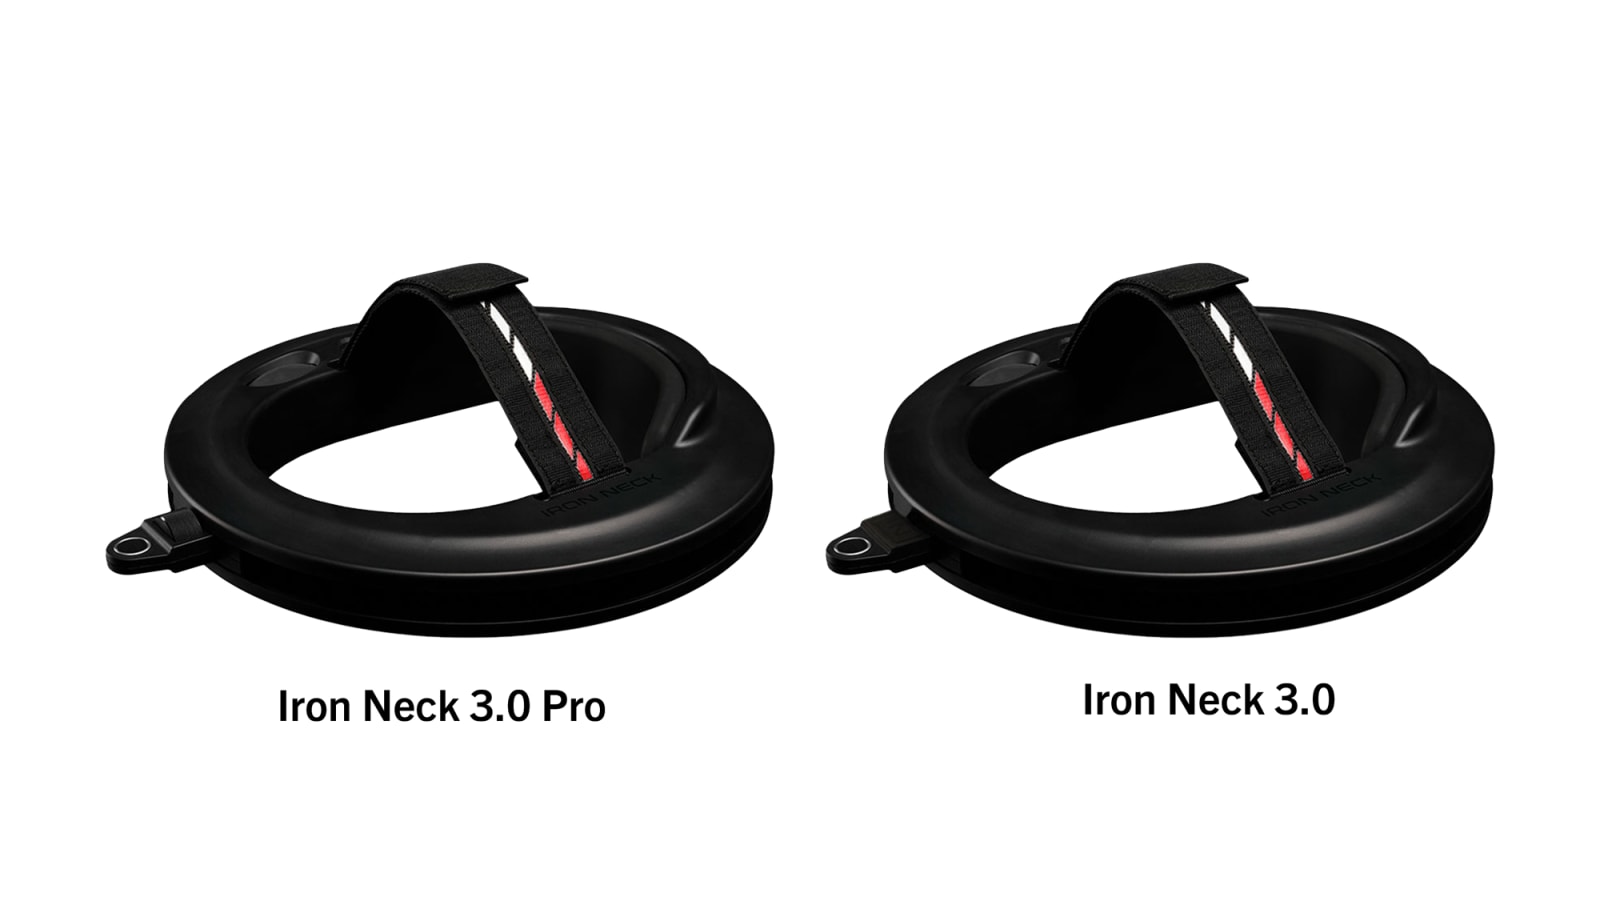 Iron Neck for Gamers - Unboxing and Overview of a Neck